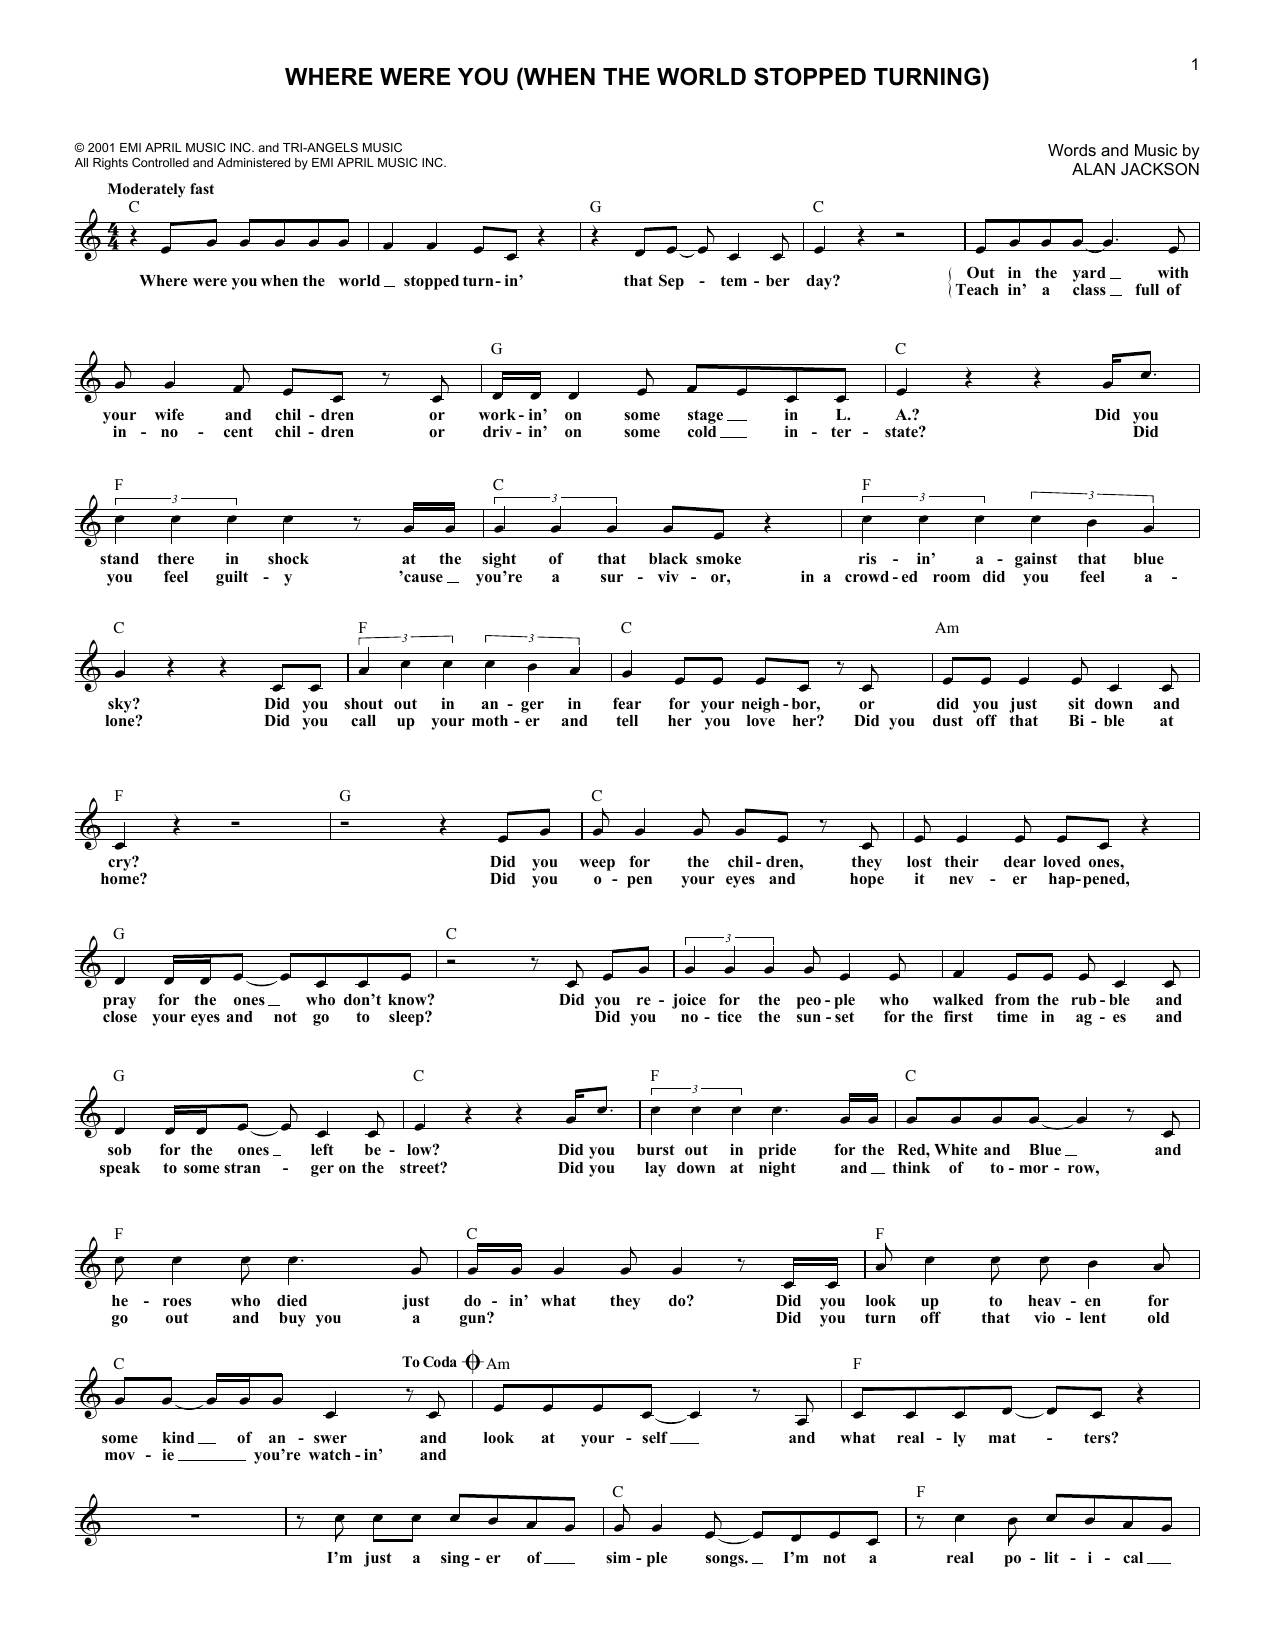 Alan Jackson Where Were You (When The World Stopped Turning) sheet music notes and chords. Download Printable PDF.